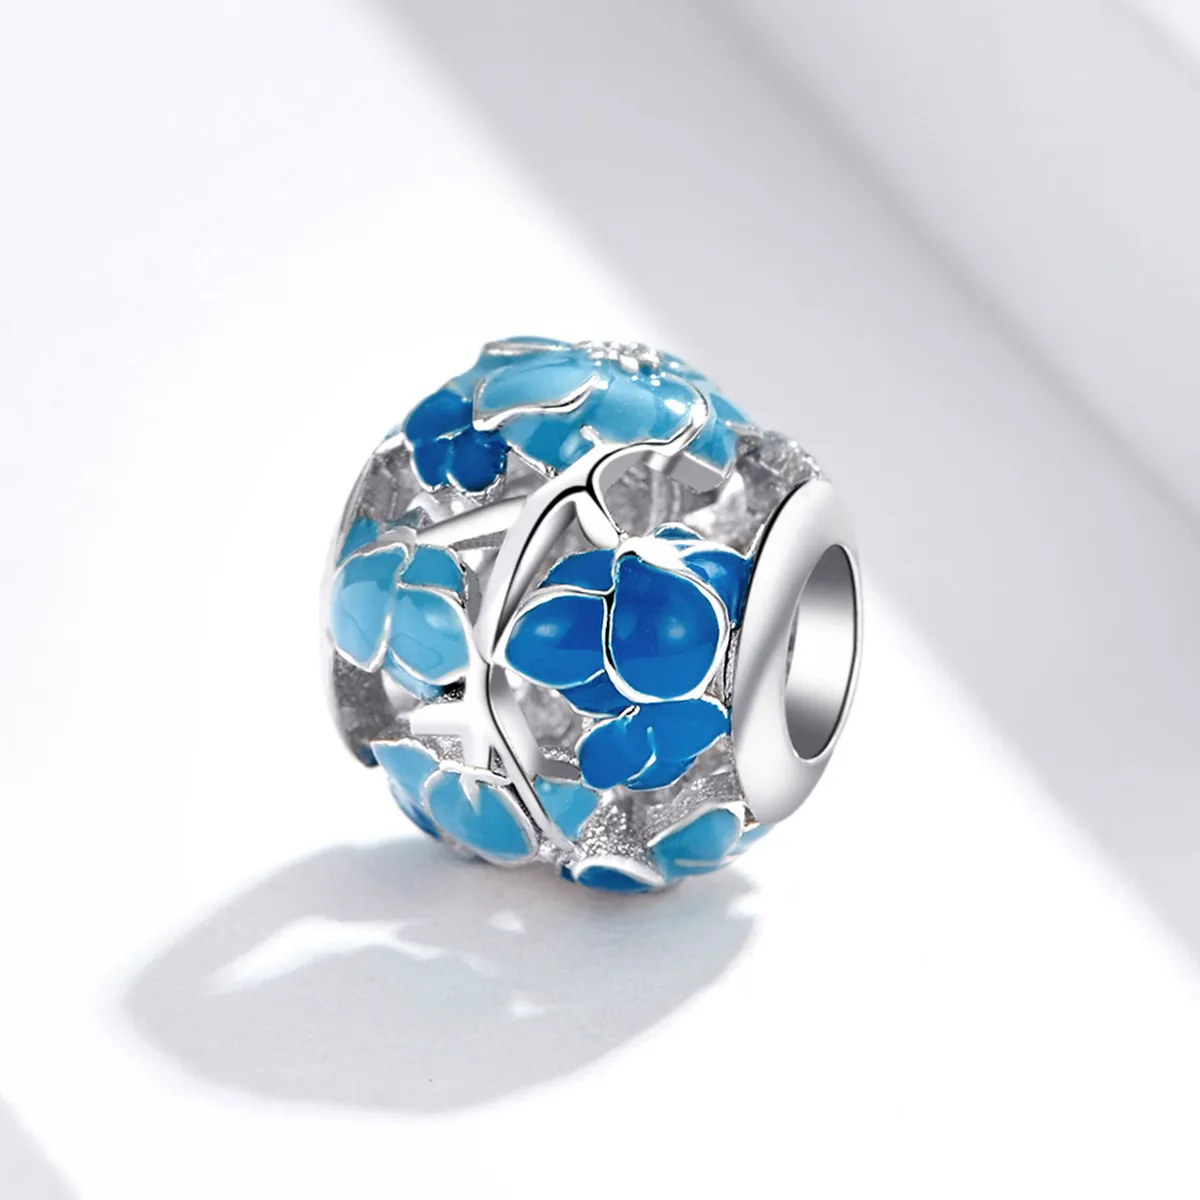 Pandora Style Blooming All The Way Charm - BSC087